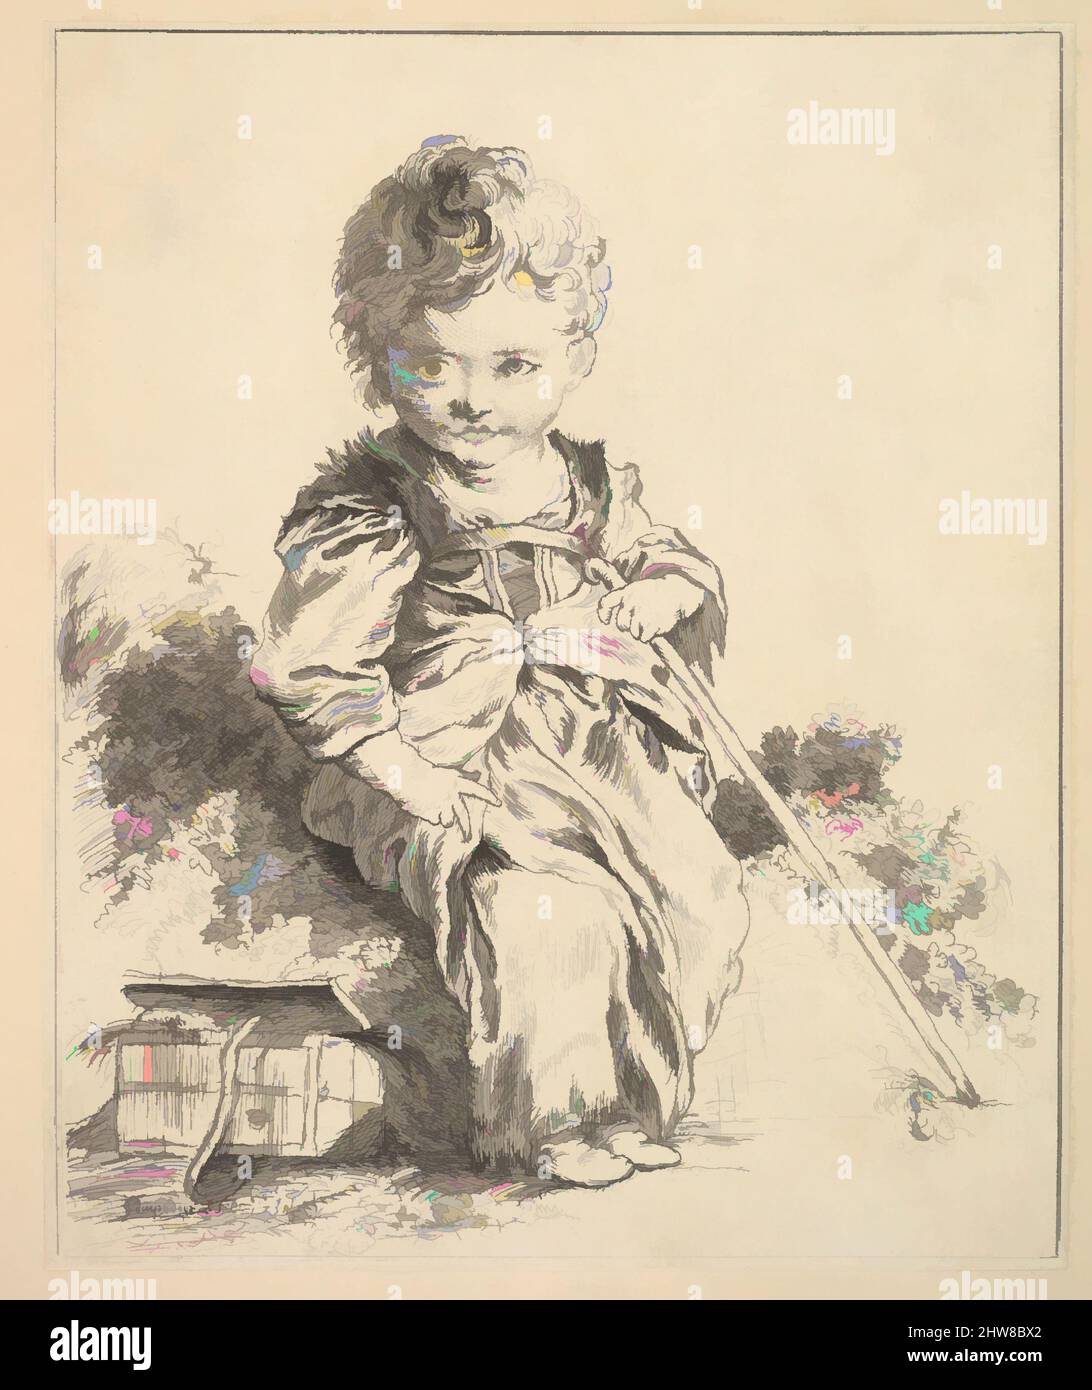 Art inspired by Un enfant assis sur une motte de terre (An enfant seated on a clod of earth), after Le Petit Savoyard by François Boucher, from Suite d'estampes gravées par madame la marquise de Pompadour d'après les pierres gravées de Guay, graveur du Roi, 1751, Etching and engraving, Classic works modernized by Artotop with a splash of modernity. Shapes, color and value, eye-catching visual impact on art. Emotions through freedom of artworks in a contemporary way. A timeless message pursuing a wildly creative new direction. Artists turning to the digital medium and creating the Artotop NFT Stock Photo